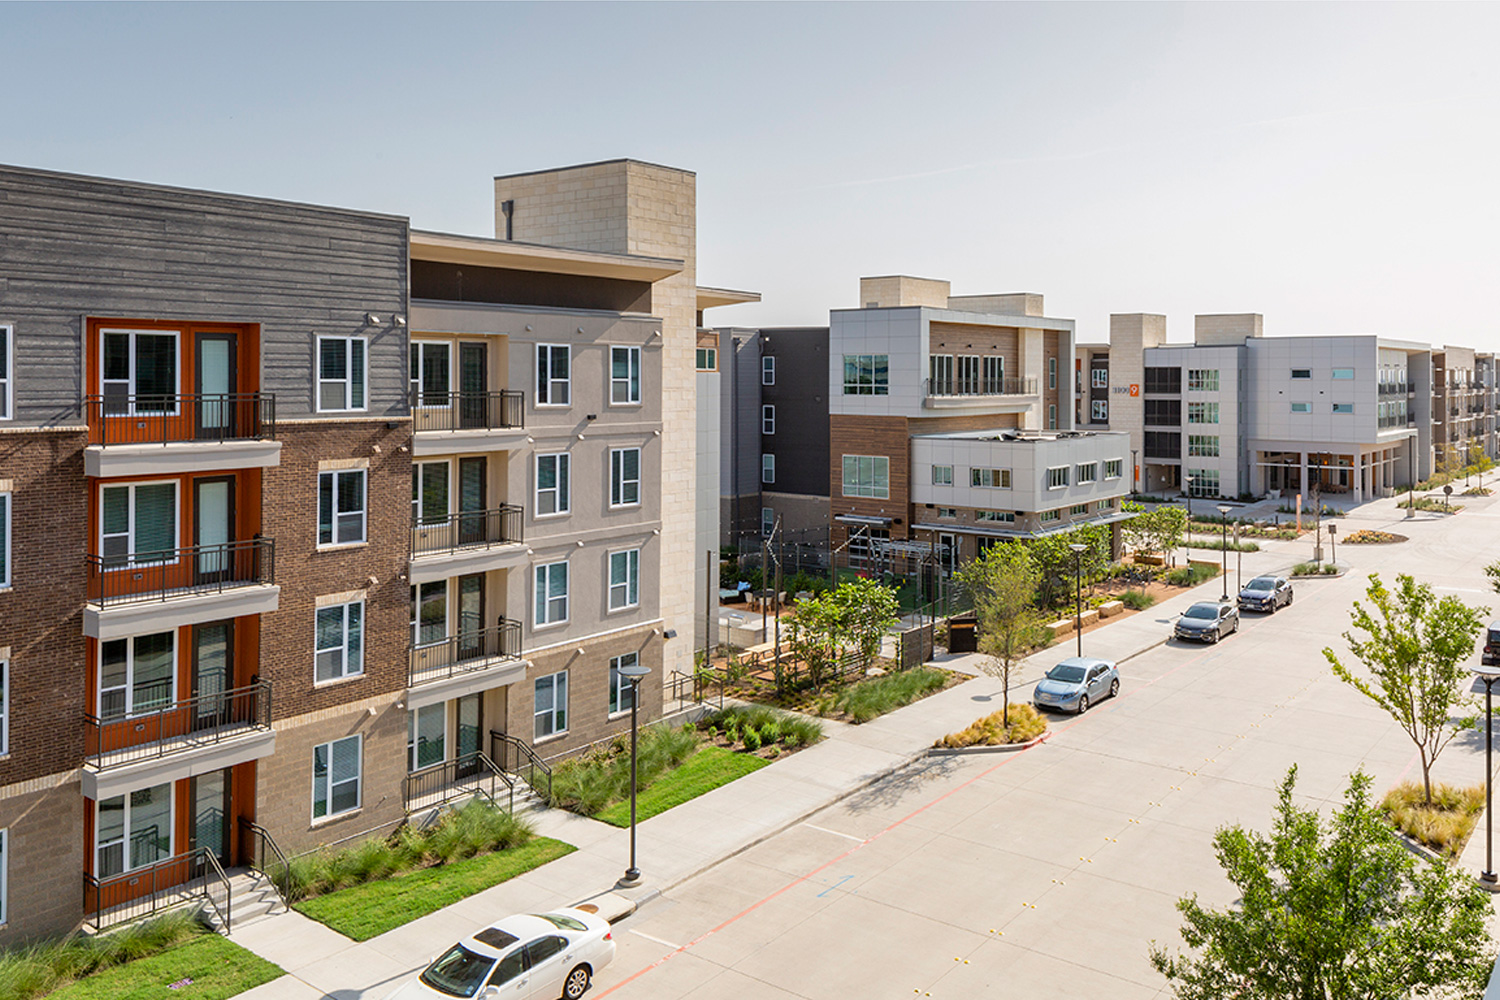 Balfour Beatty Campus Solutions, Wynne/Jackson open second phase of mixed-use student housing development near the University of Texas at Dallas